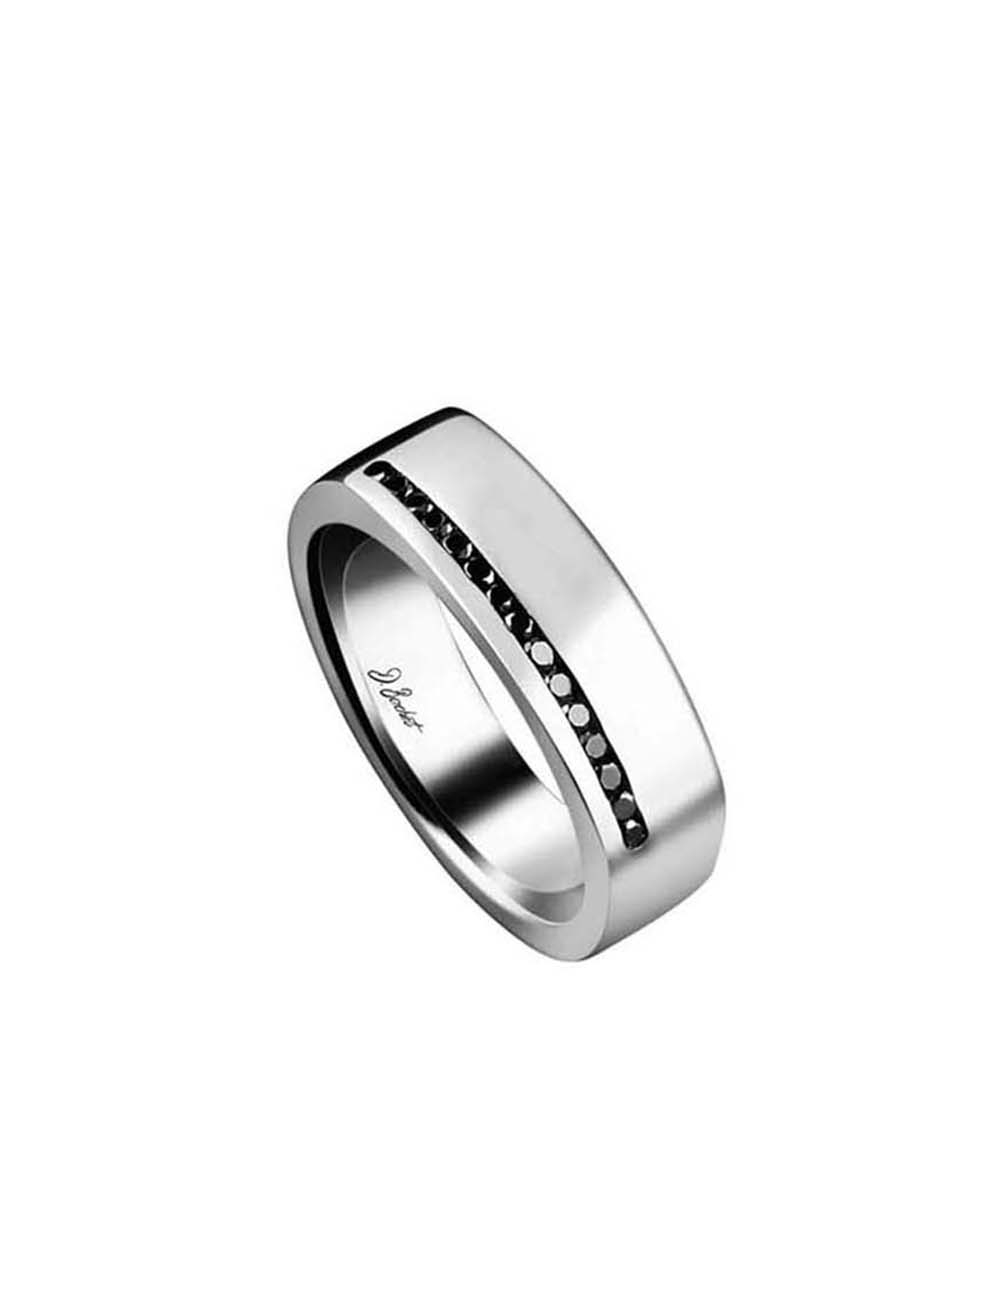 For men who want a sleek and refined signet ring in platinum and black diamonds